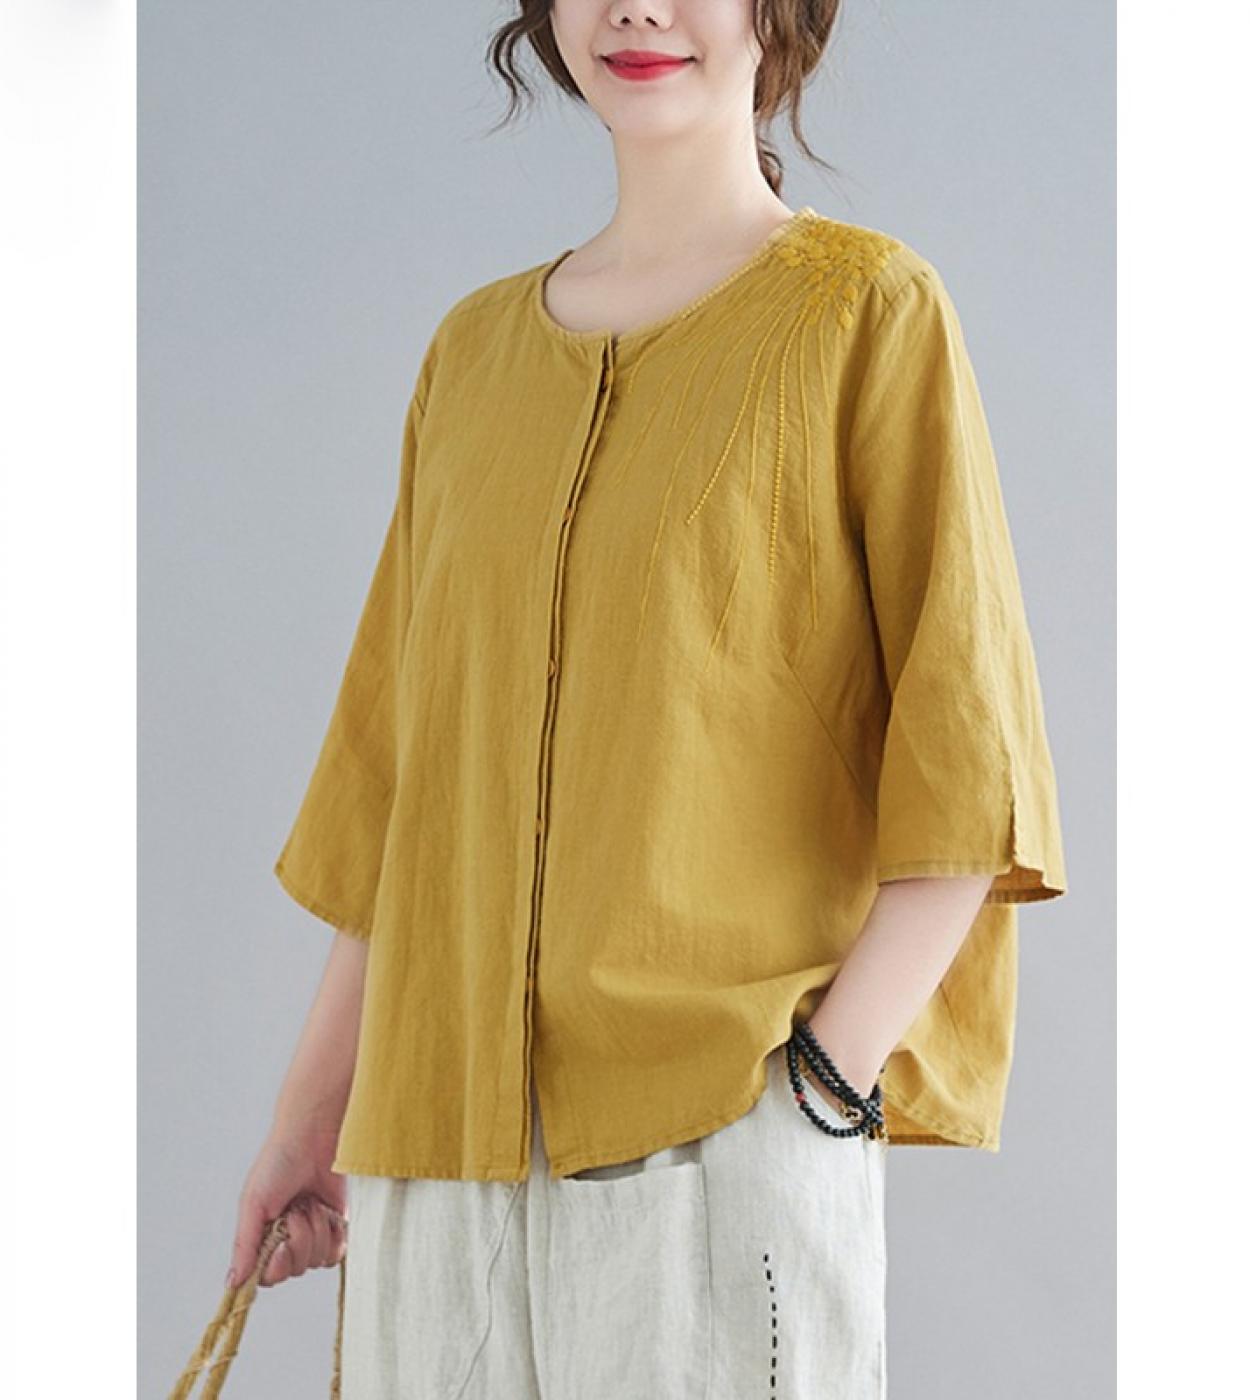 New Arrival Summer Arts Style Women Loose O Neck Half Sleeve Blouse Embroidery Cotton Linen Covered Button Casual Shirts